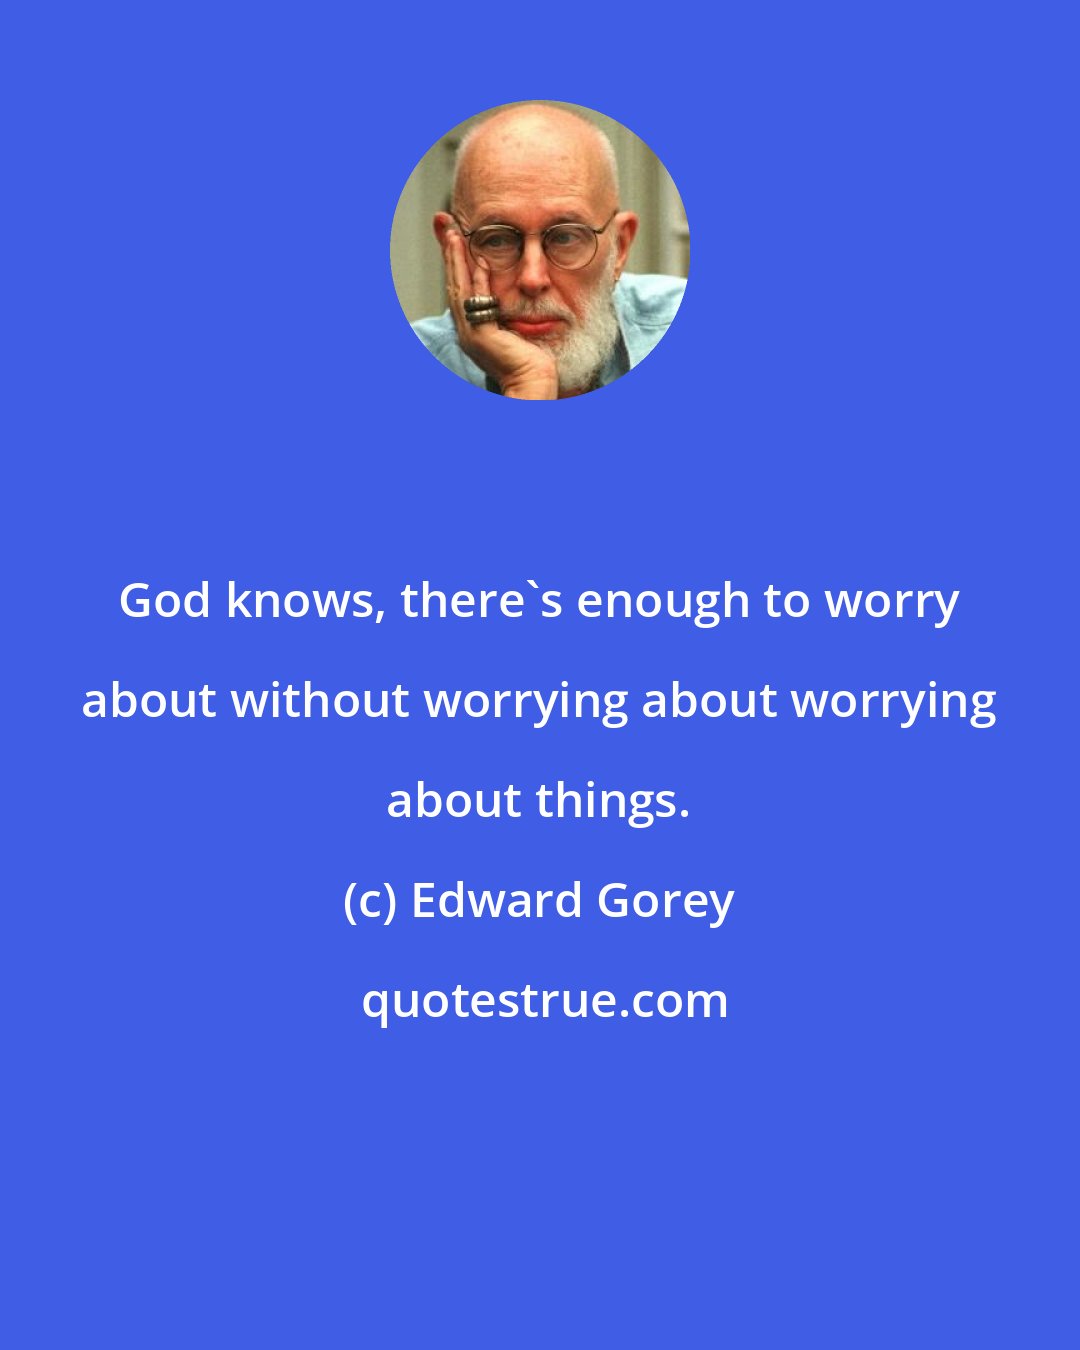 Edward Gorey: God knows, there's enough to worry about without worrying about worrying about things.